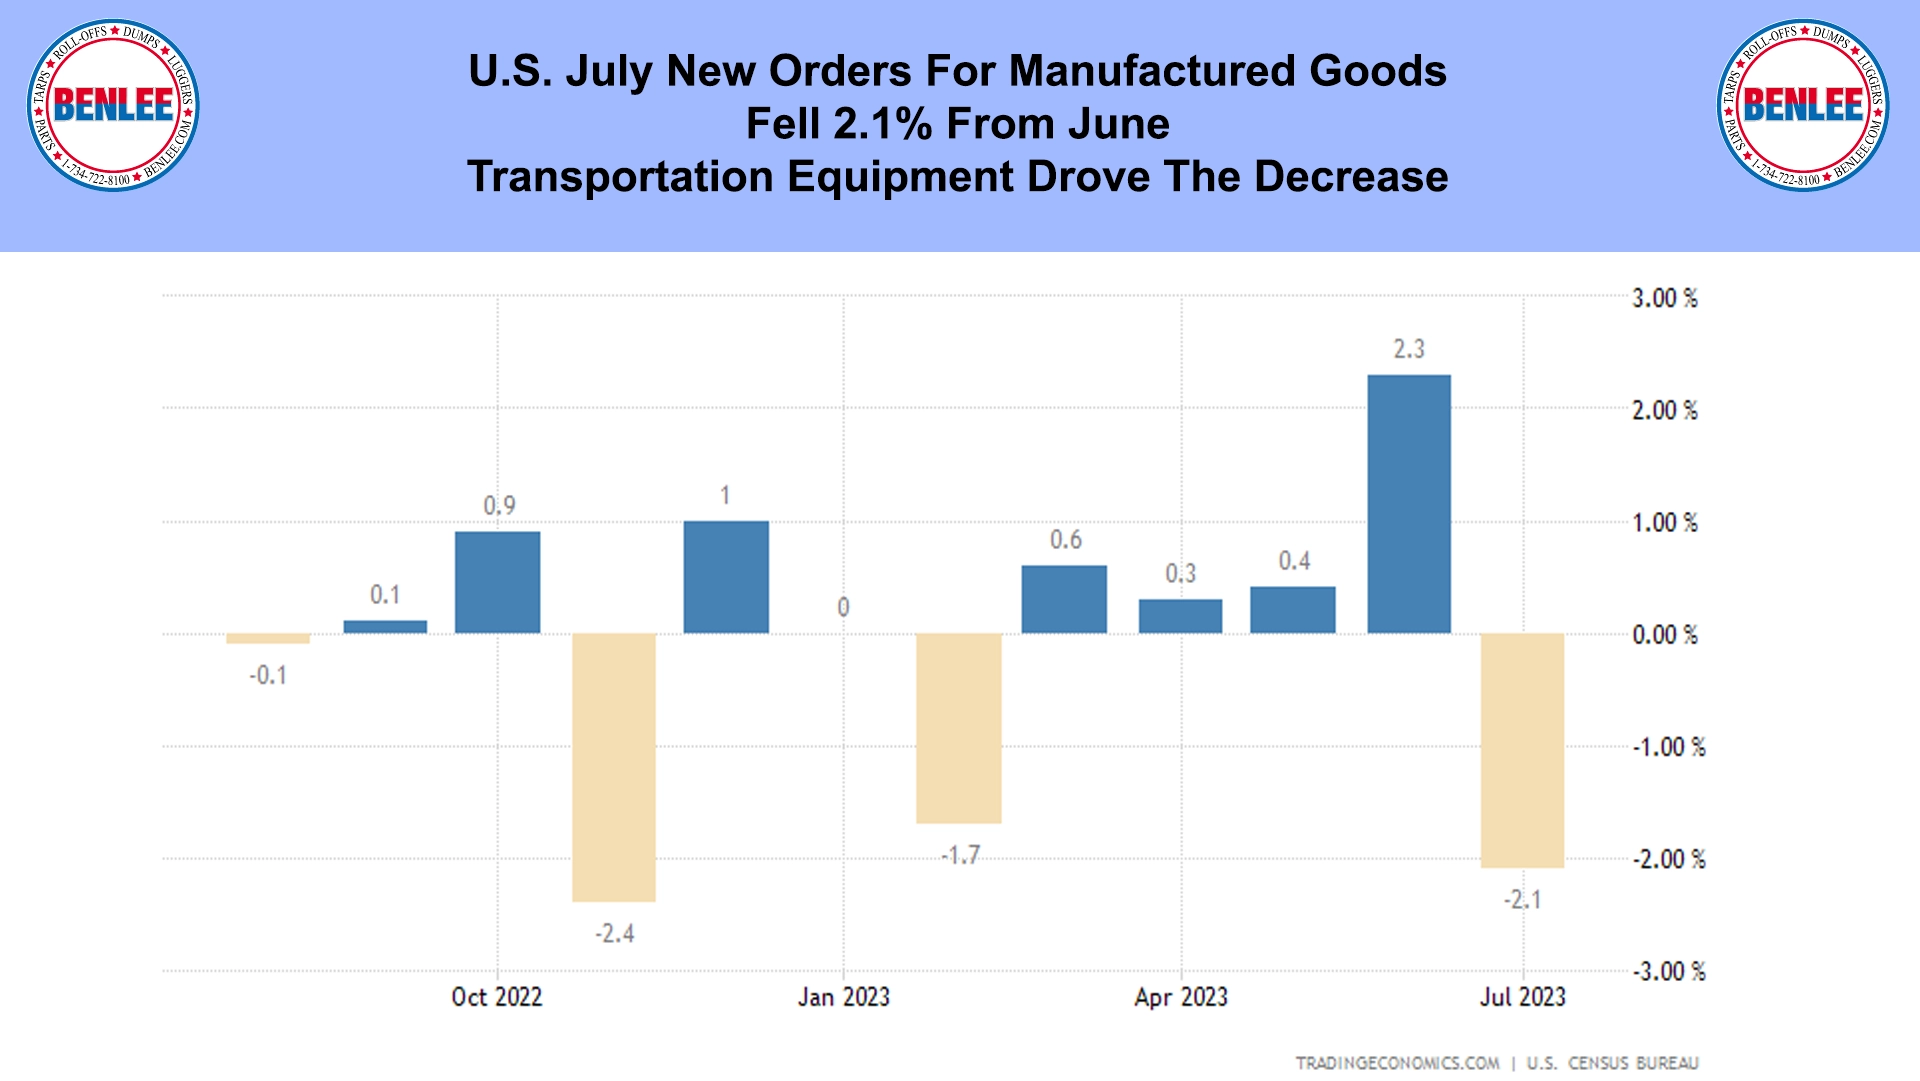 U.S. July New Orders For Manufactured Goods